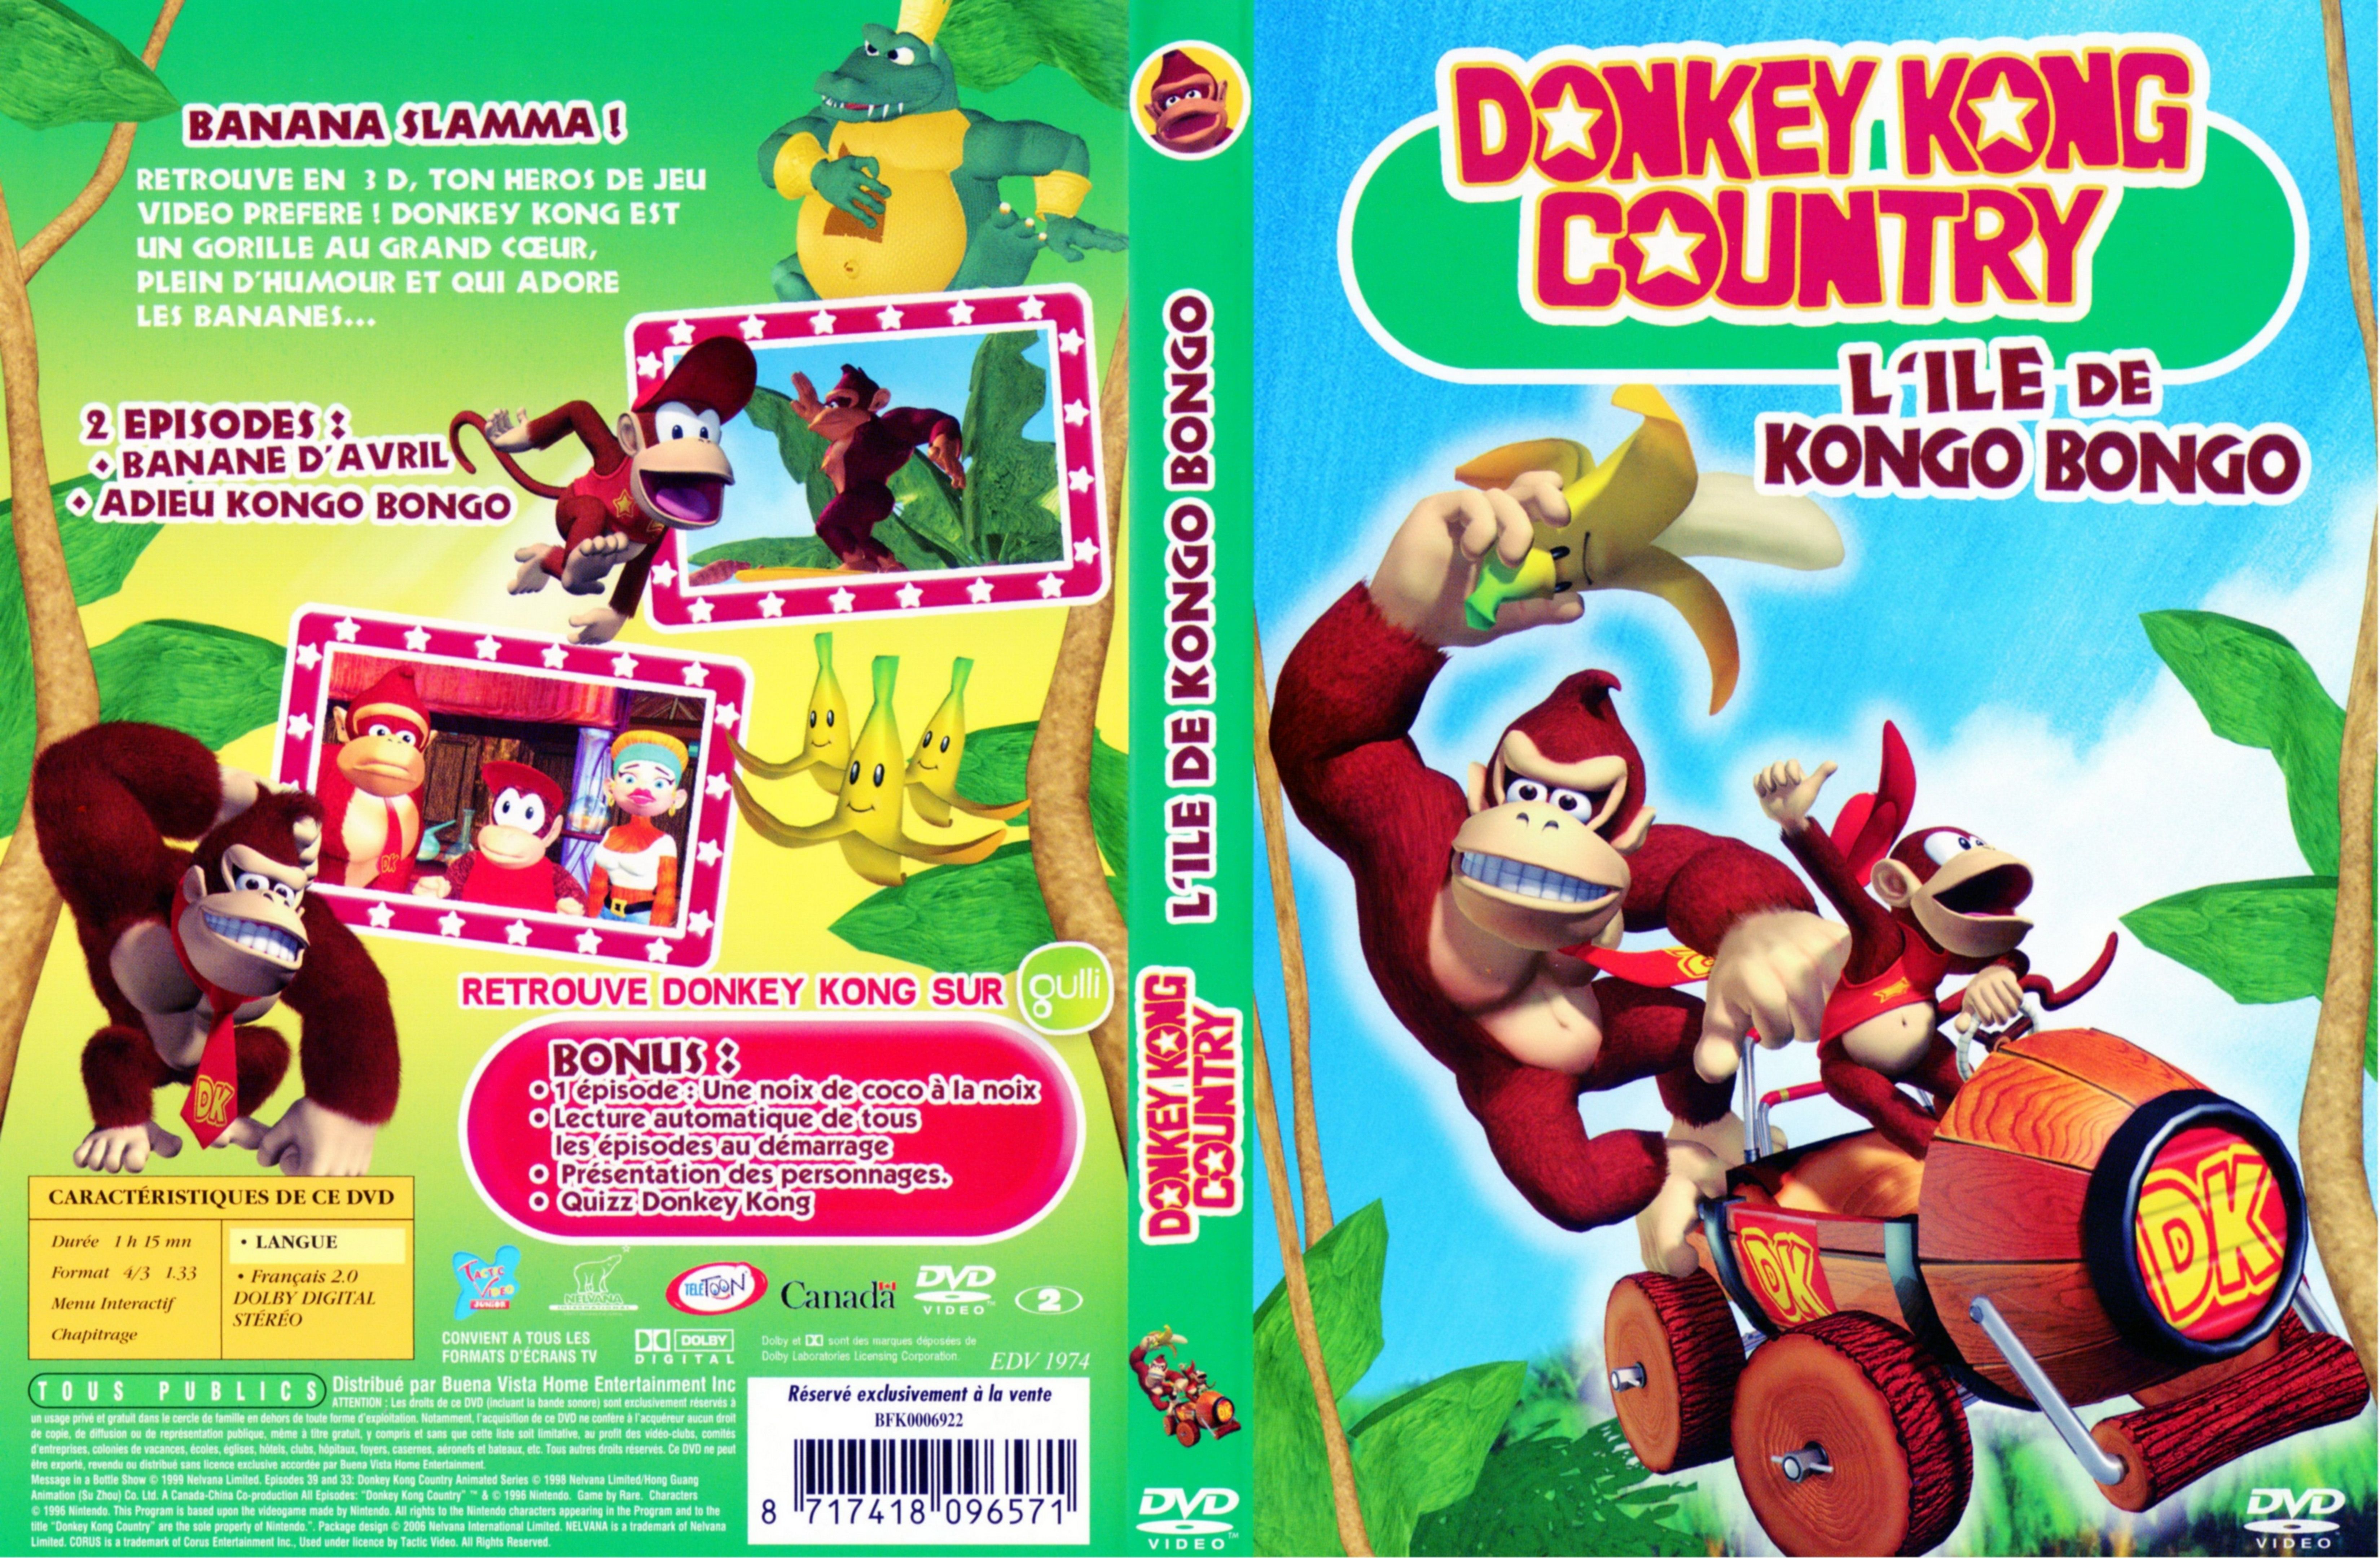 Jaquette DVD Donkey Kong country - L